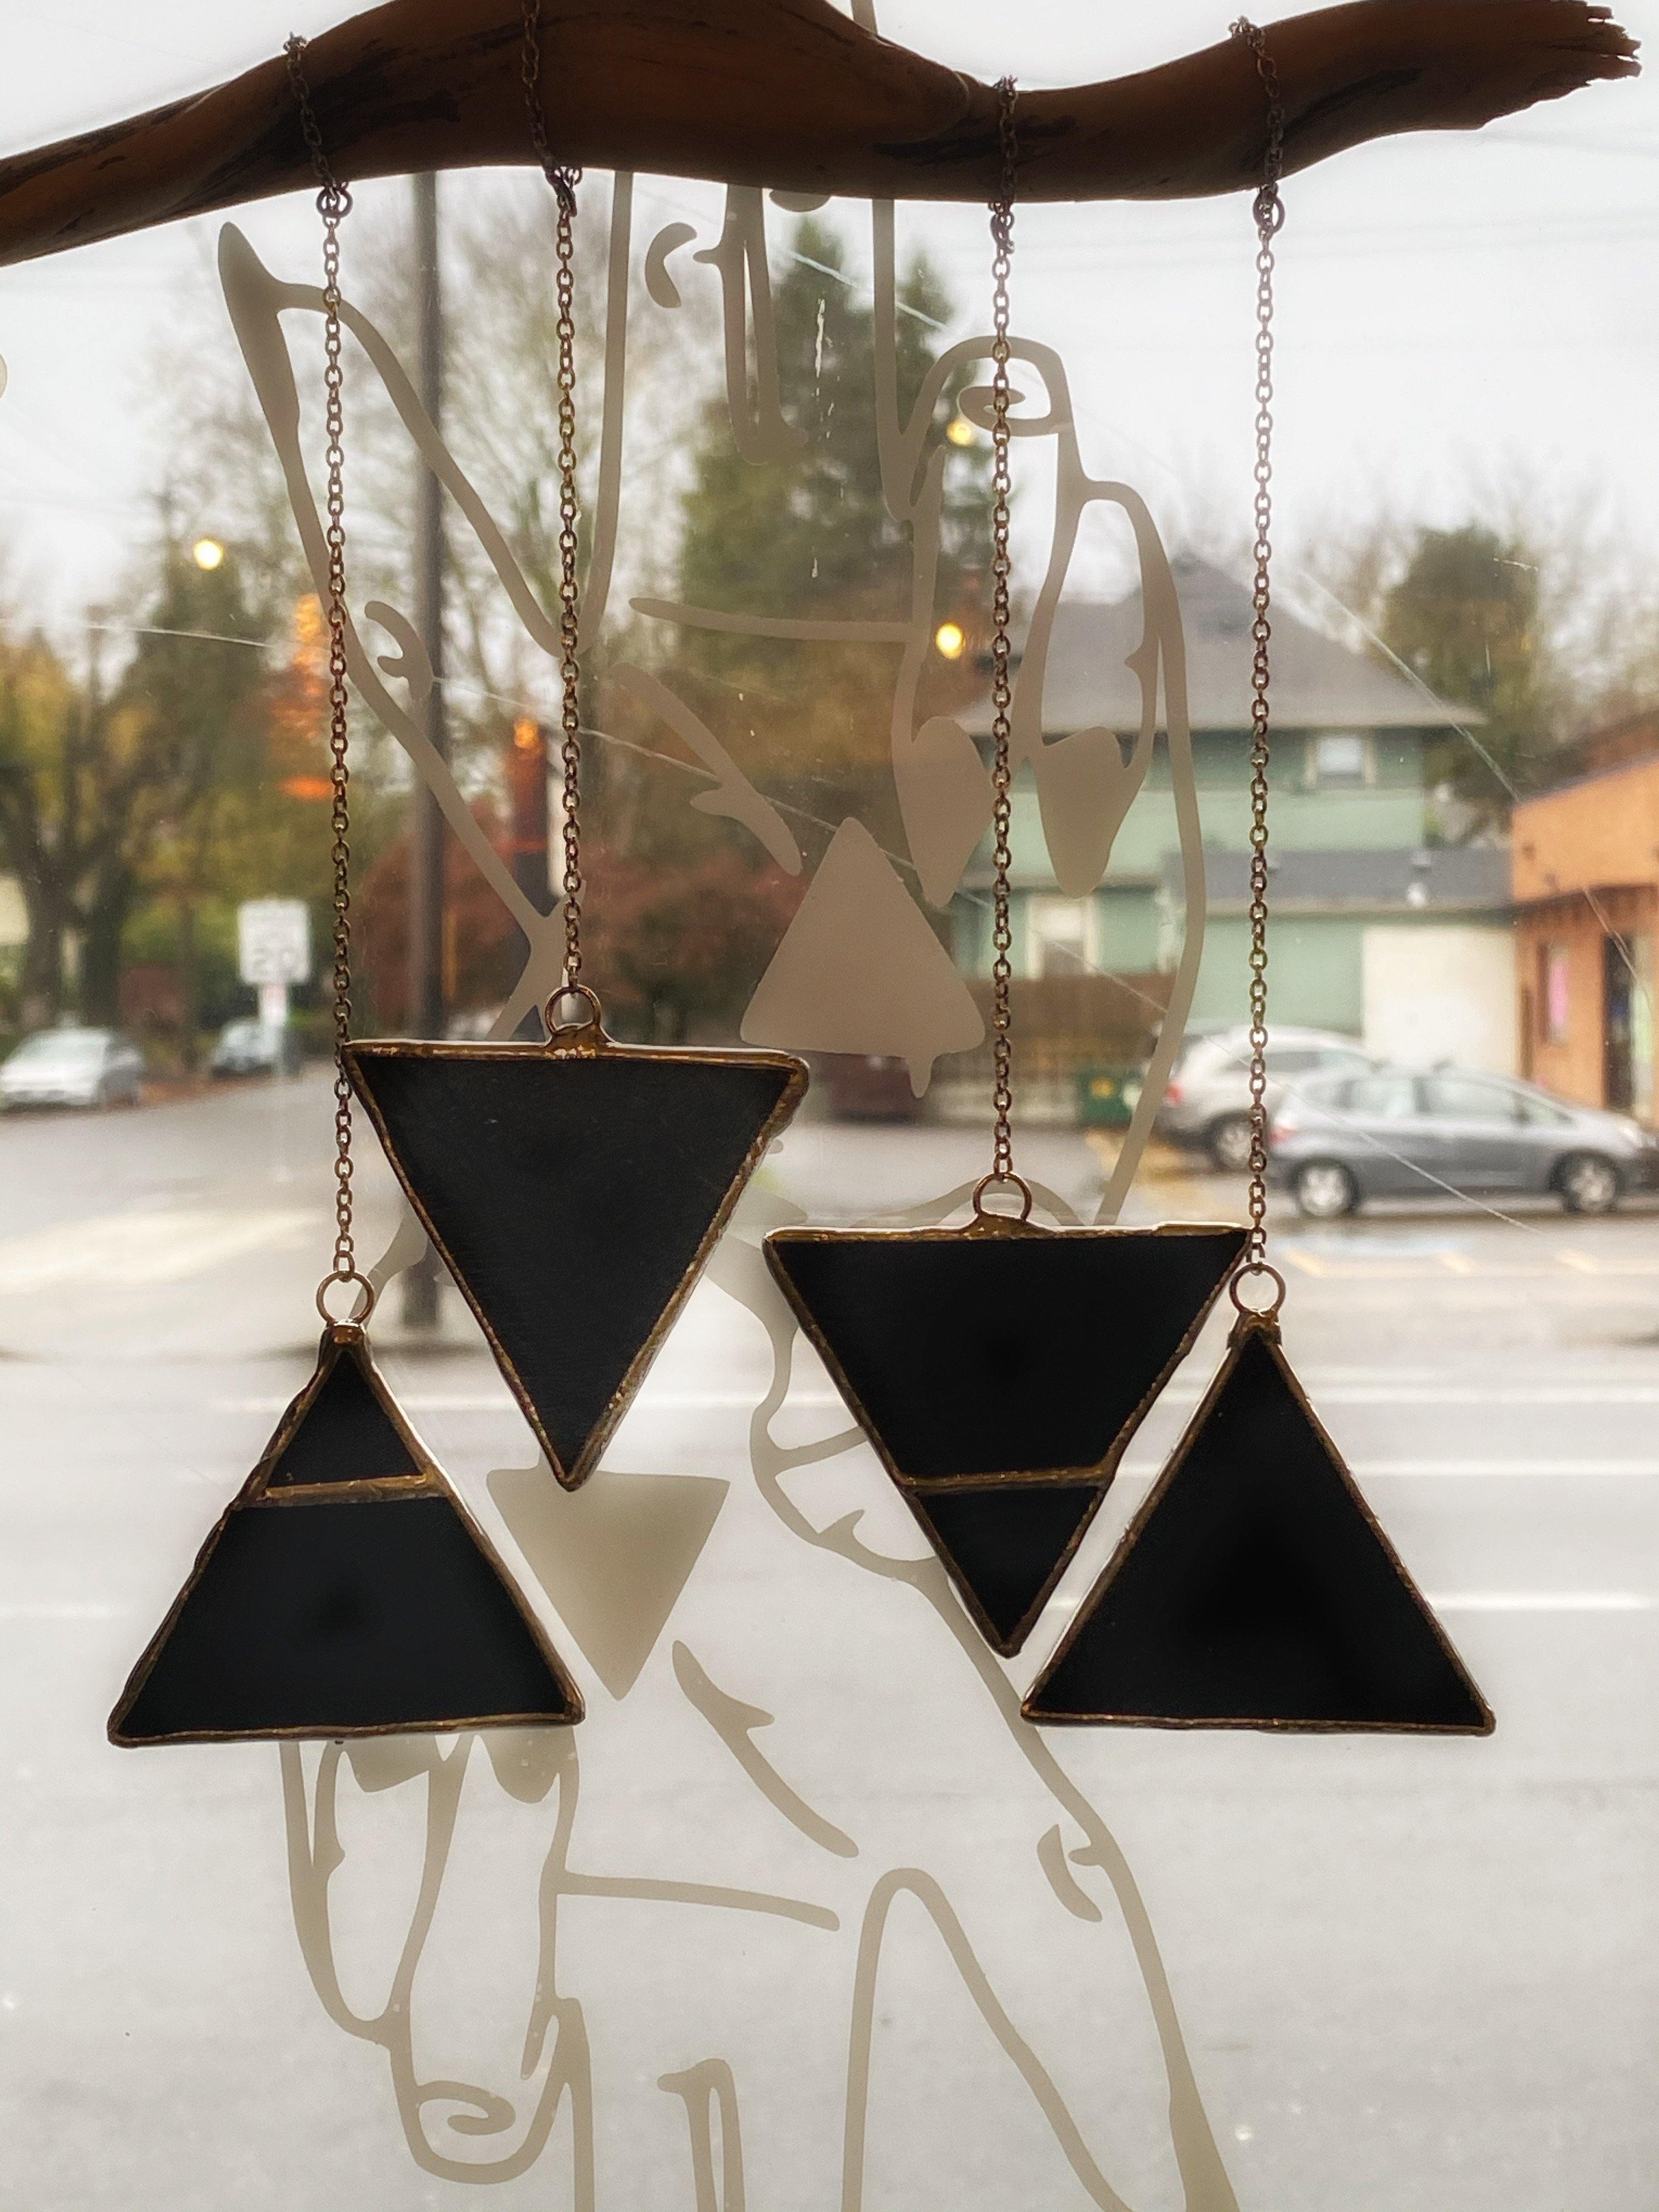 Stained Glass Hanging Element Symbols - Keven Craft Rituals